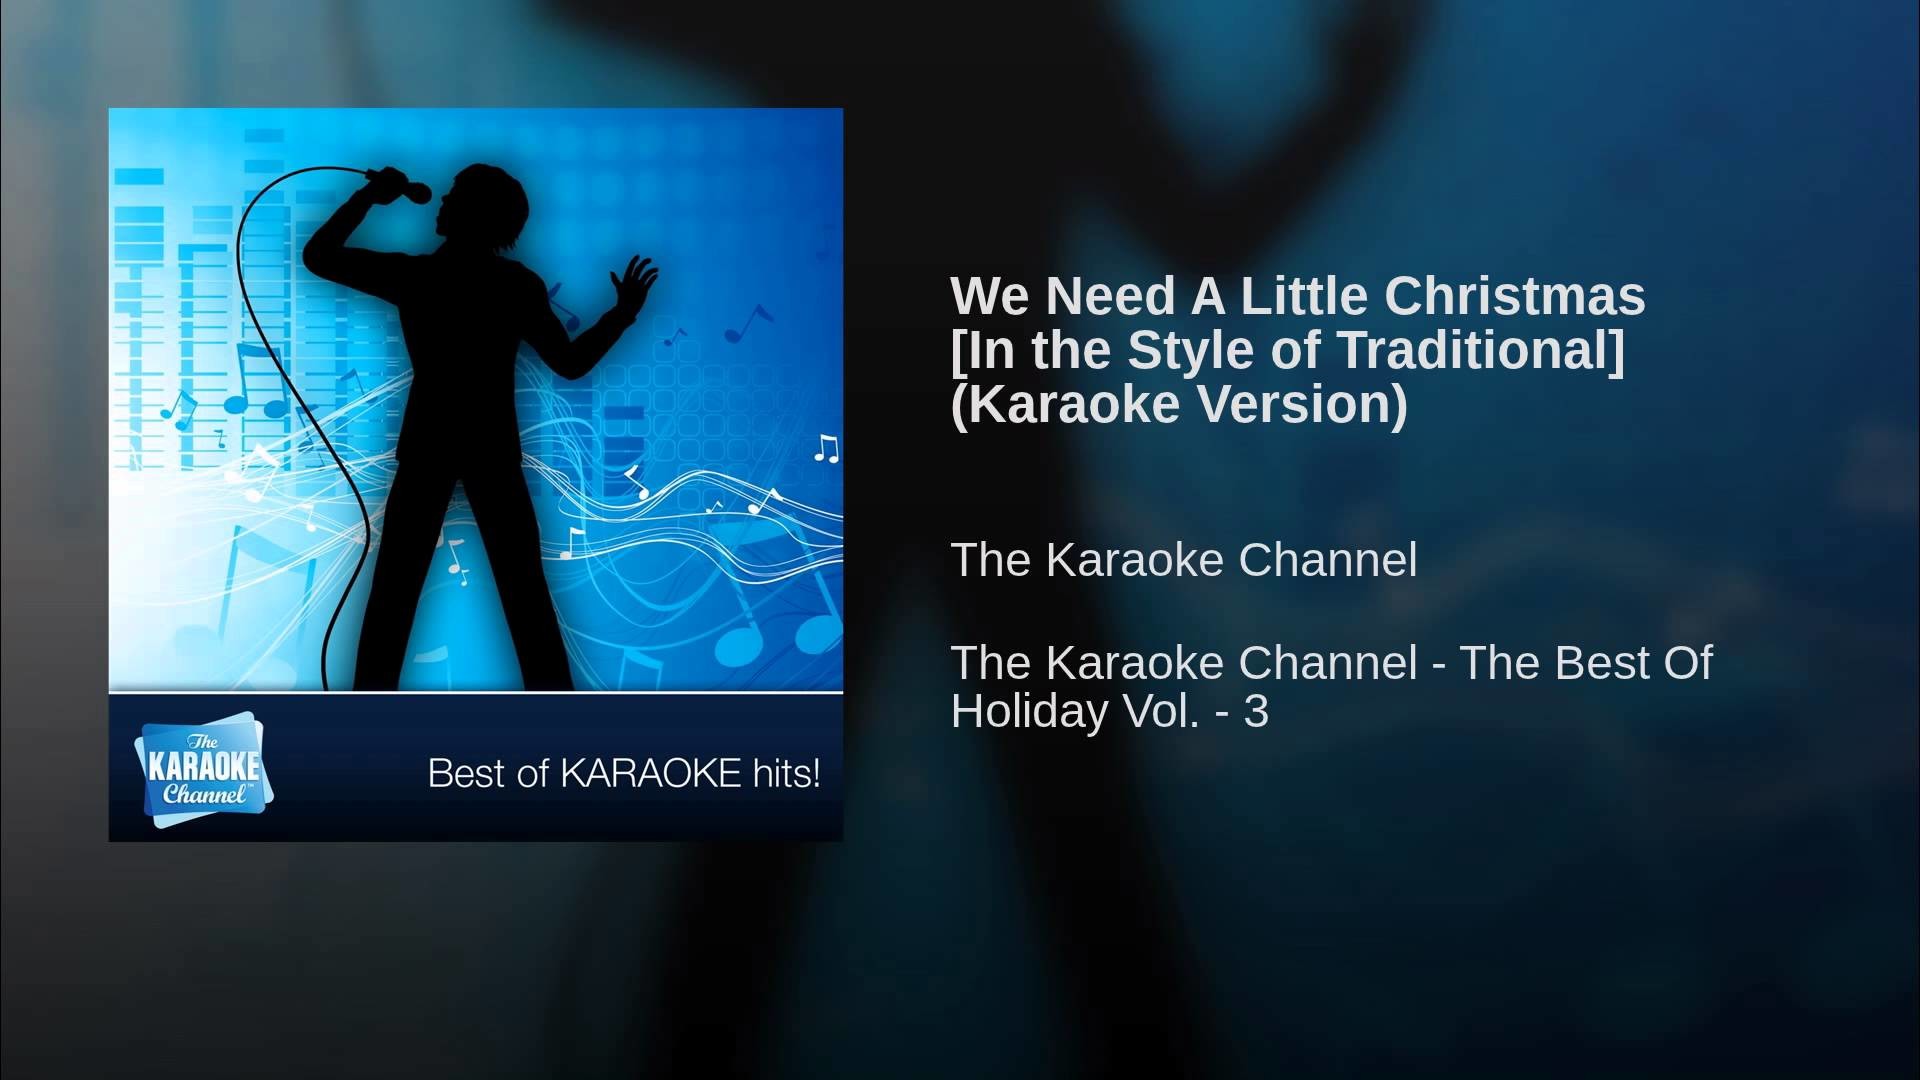 We Need A Little Christmas In the Style of Traditional Karaoke Version